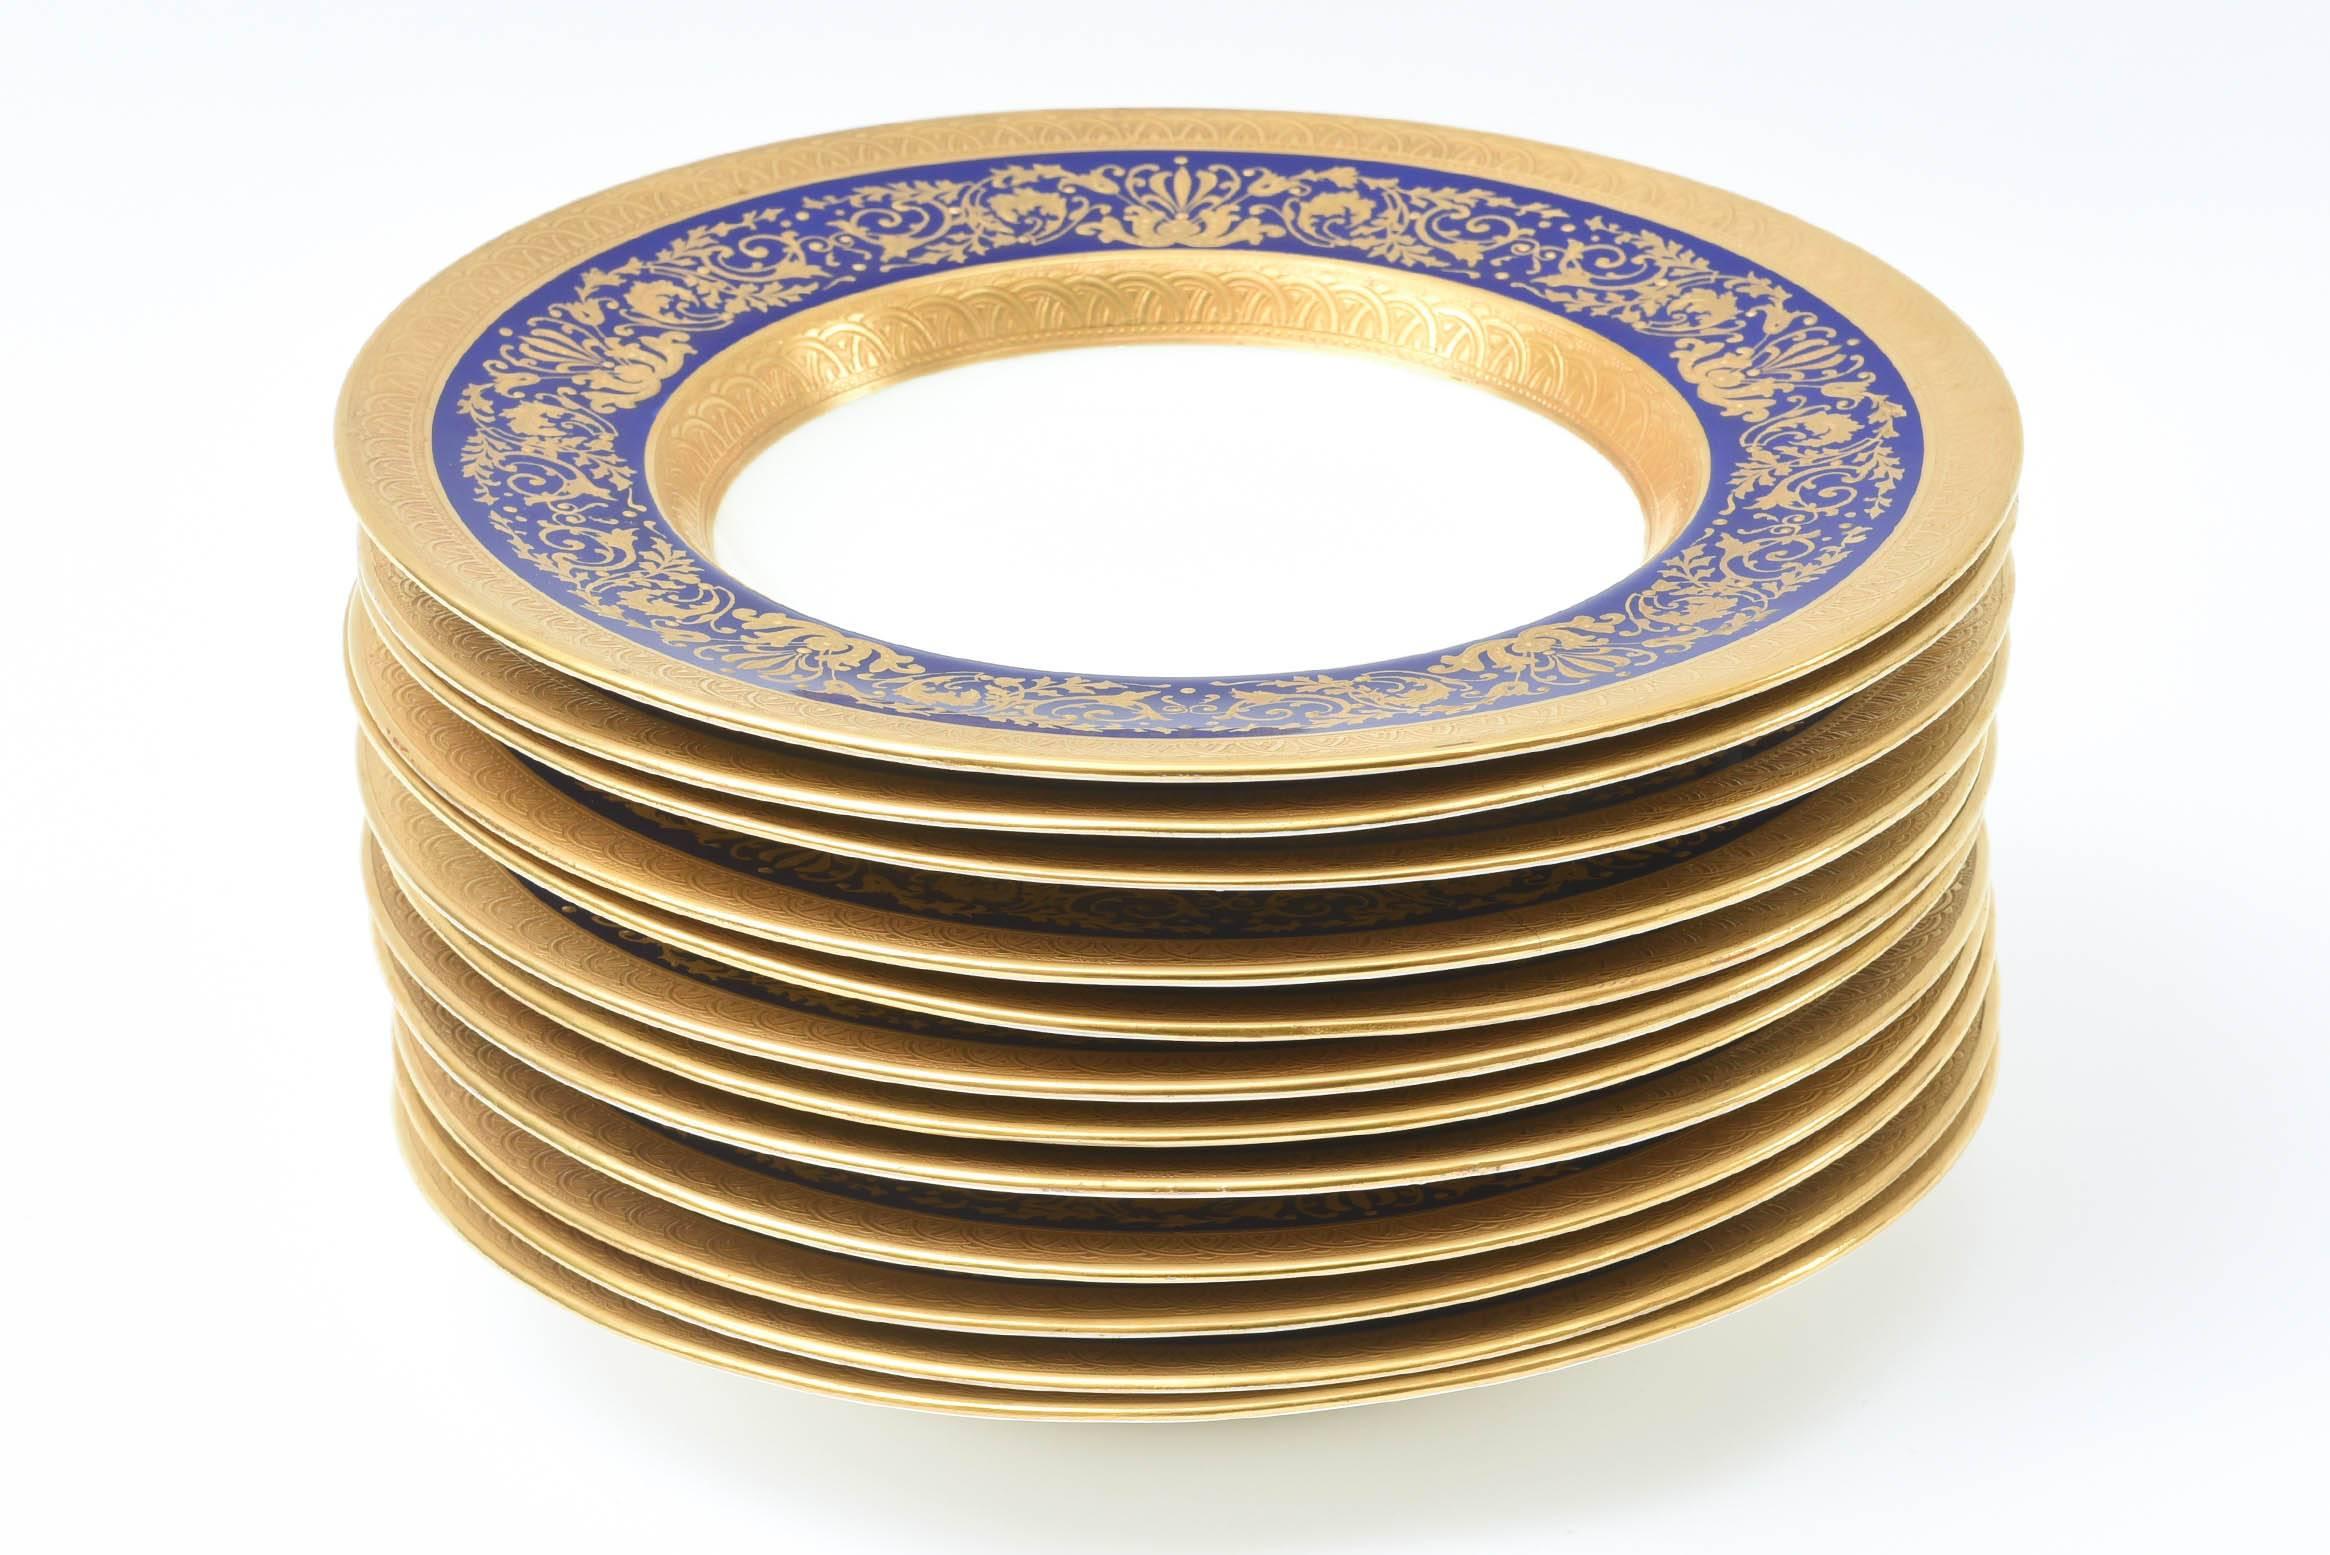 A lovely set of 12 custom for Tiffany by one of England's premier firms: Minton. Raised tooled gilding on a vibrant and elegant cobalt blue collar. The perfect size for soup, salad, risotto, first course and desserts with ice cream or sauce. We love